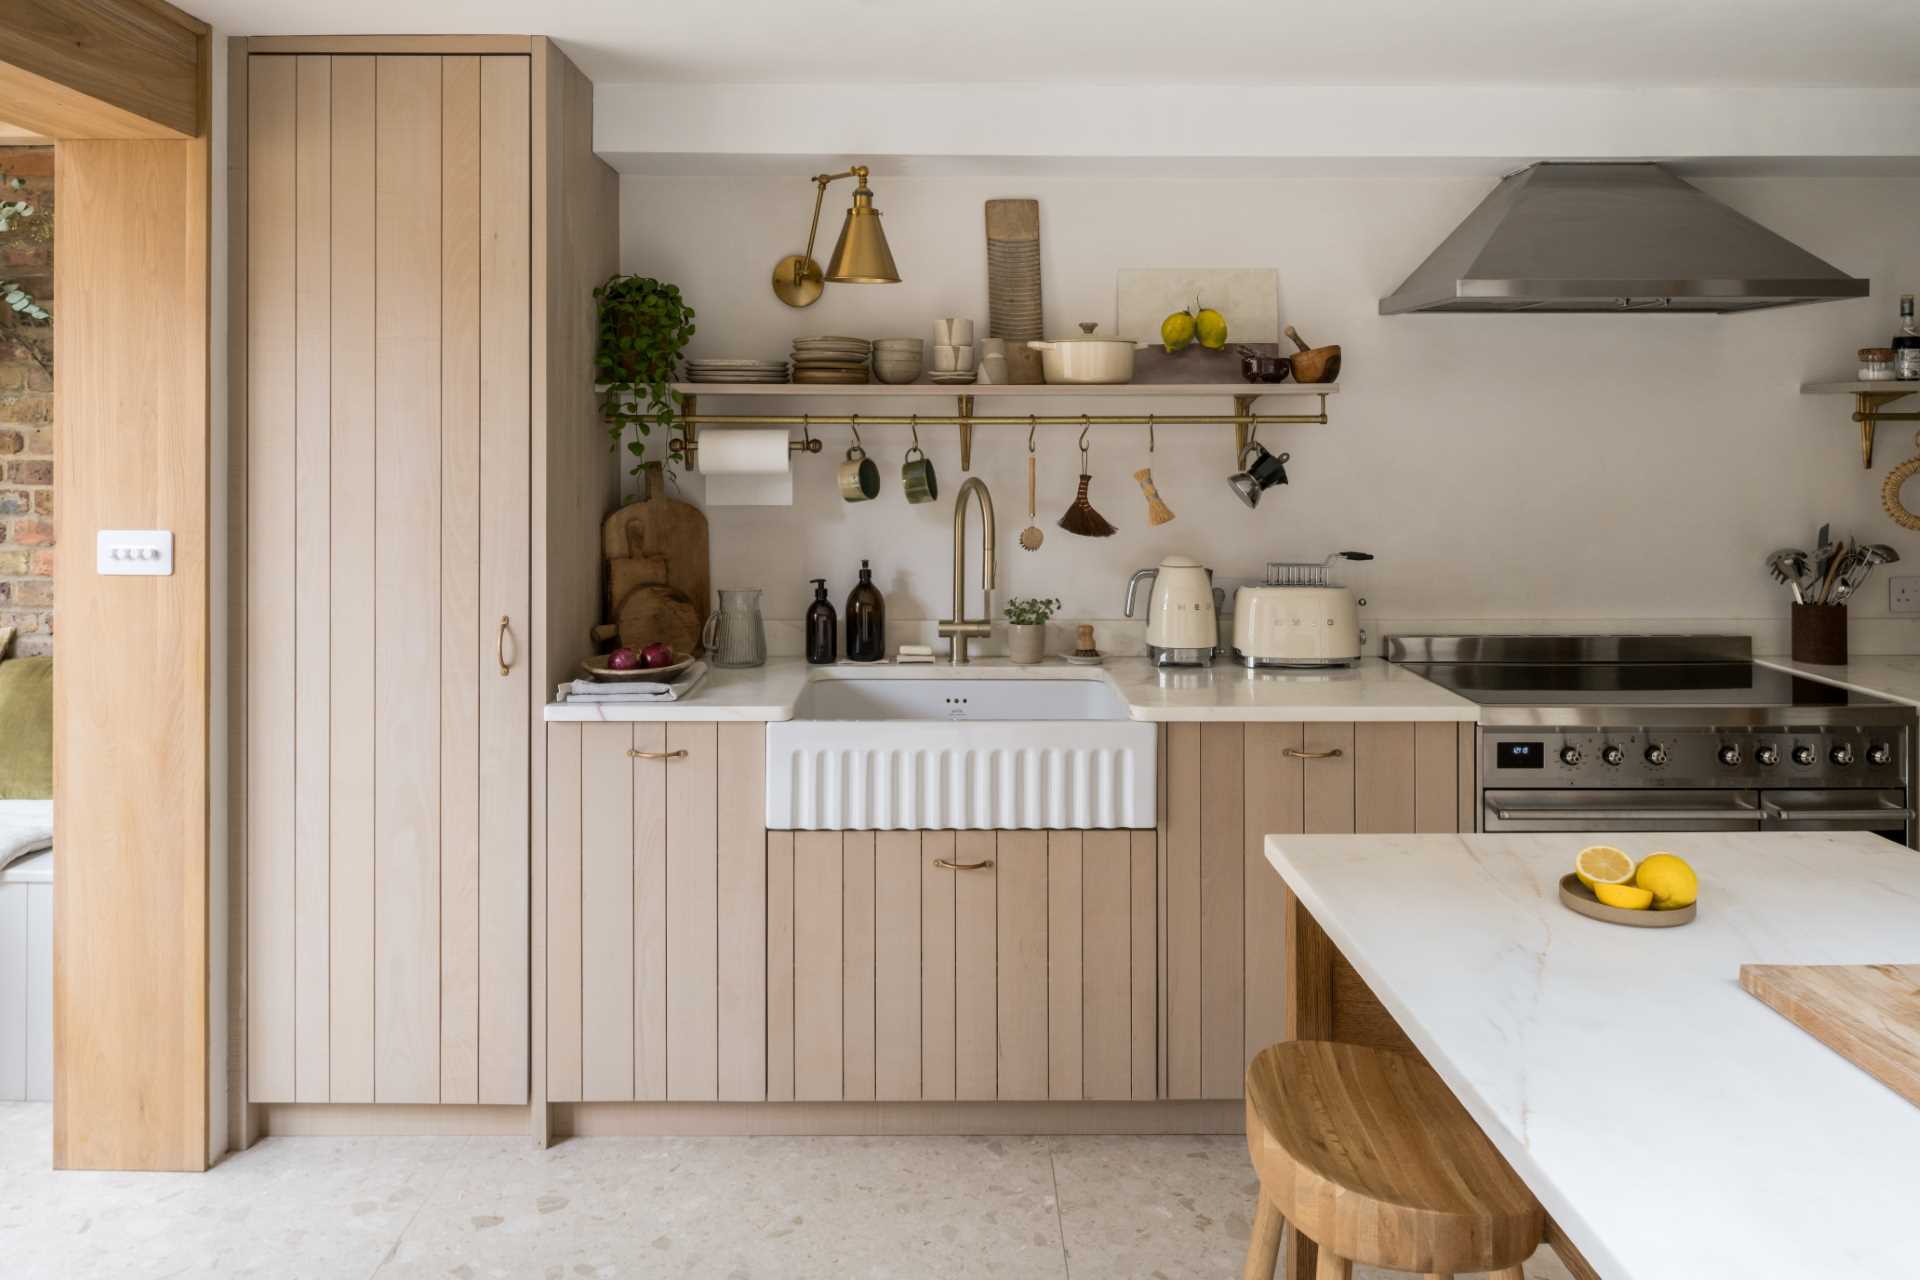 This contemporary kitchen has wood cabinets, while a white apron front sink is positioned between additional counter space and below a floating shelf.